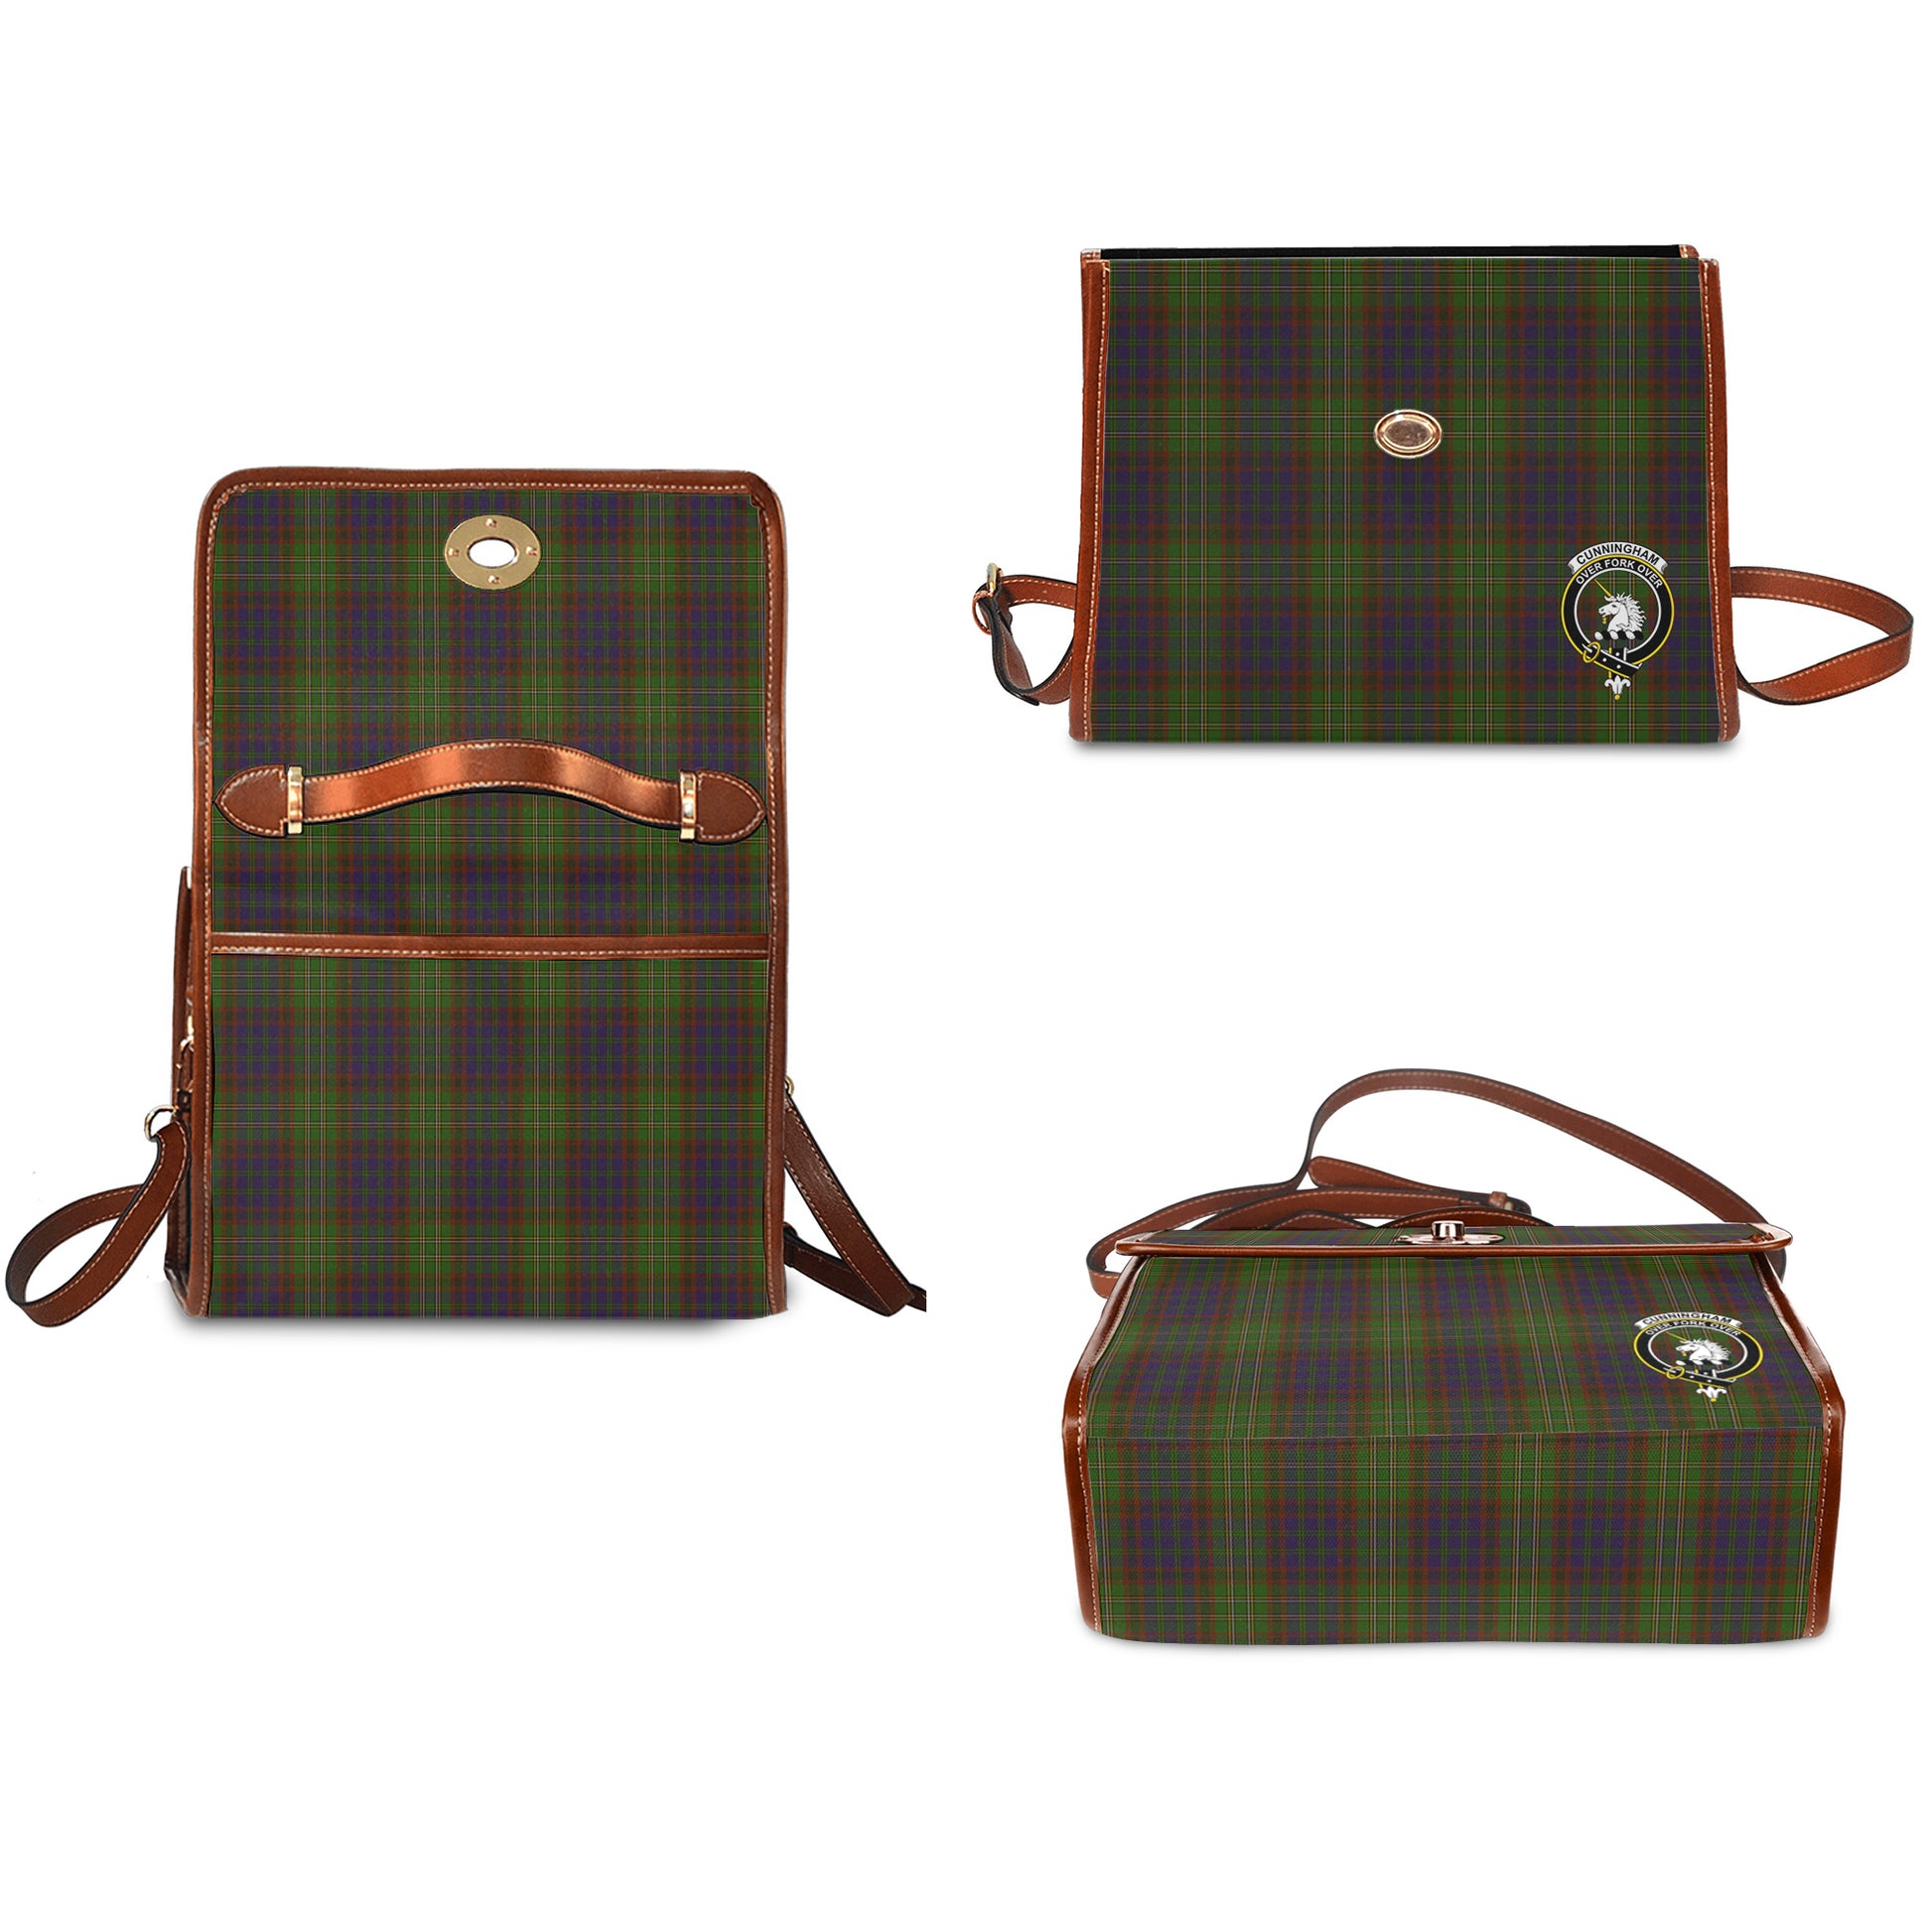 cunningham-hunting-modern-tartan-leather-strap-waterproof-canvas-bag-with-family-crest